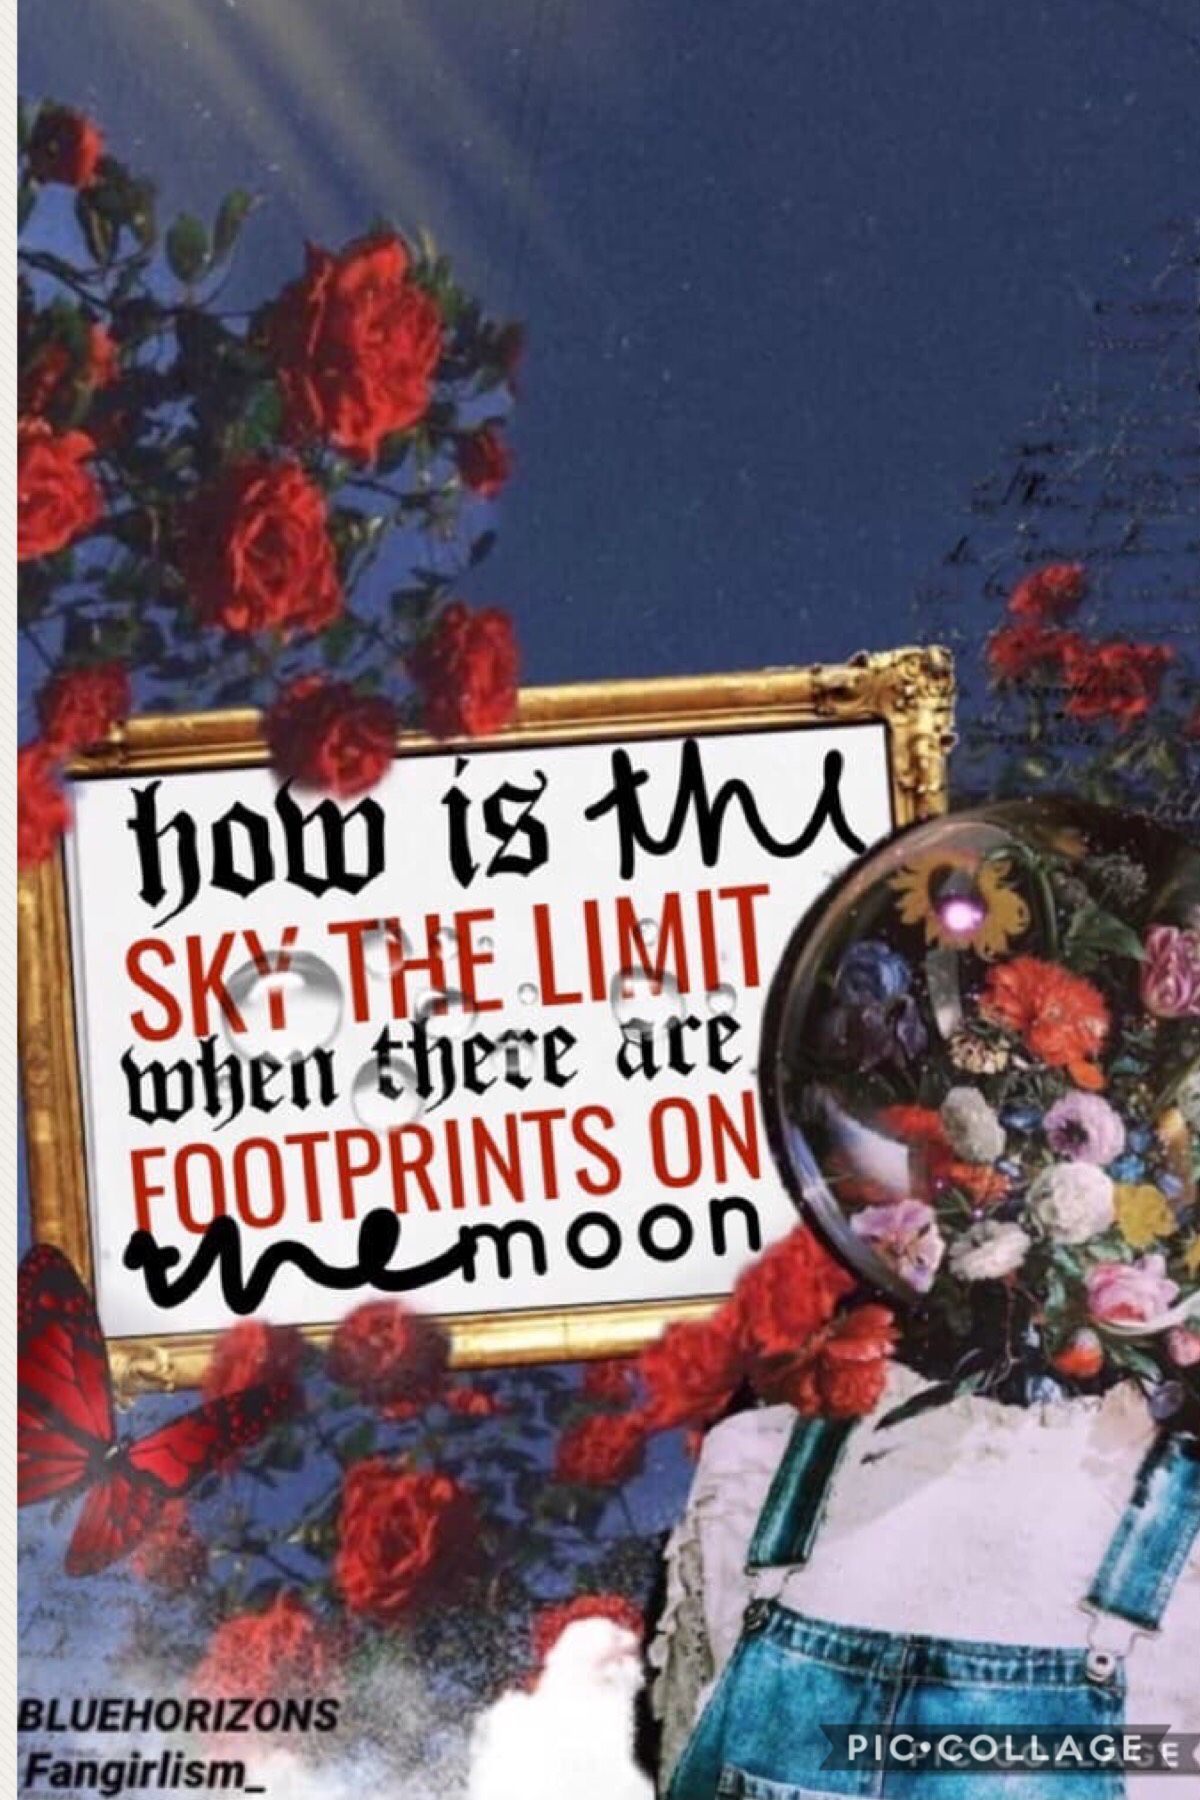 Collab with the lovely BLUEHORIZONS!  She did the beautiful text and picked the quote and I created the background. Please go follow her and her gorgeous collages now if you aren’t already! 